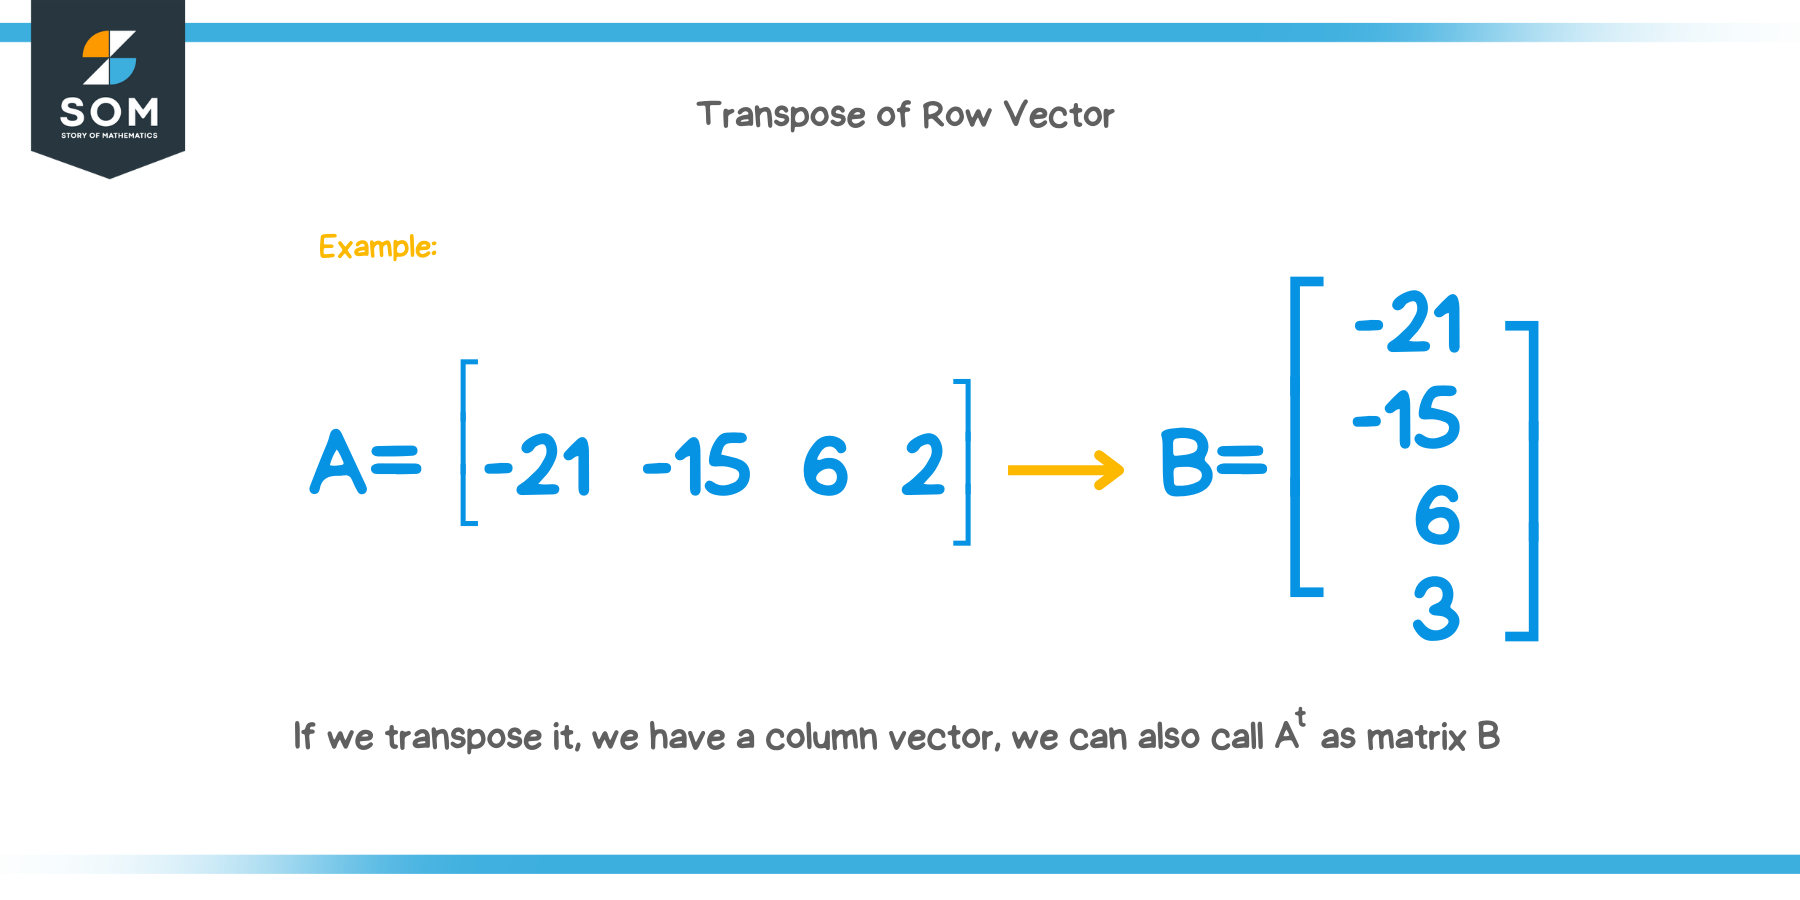 Transpose of a Row Vector